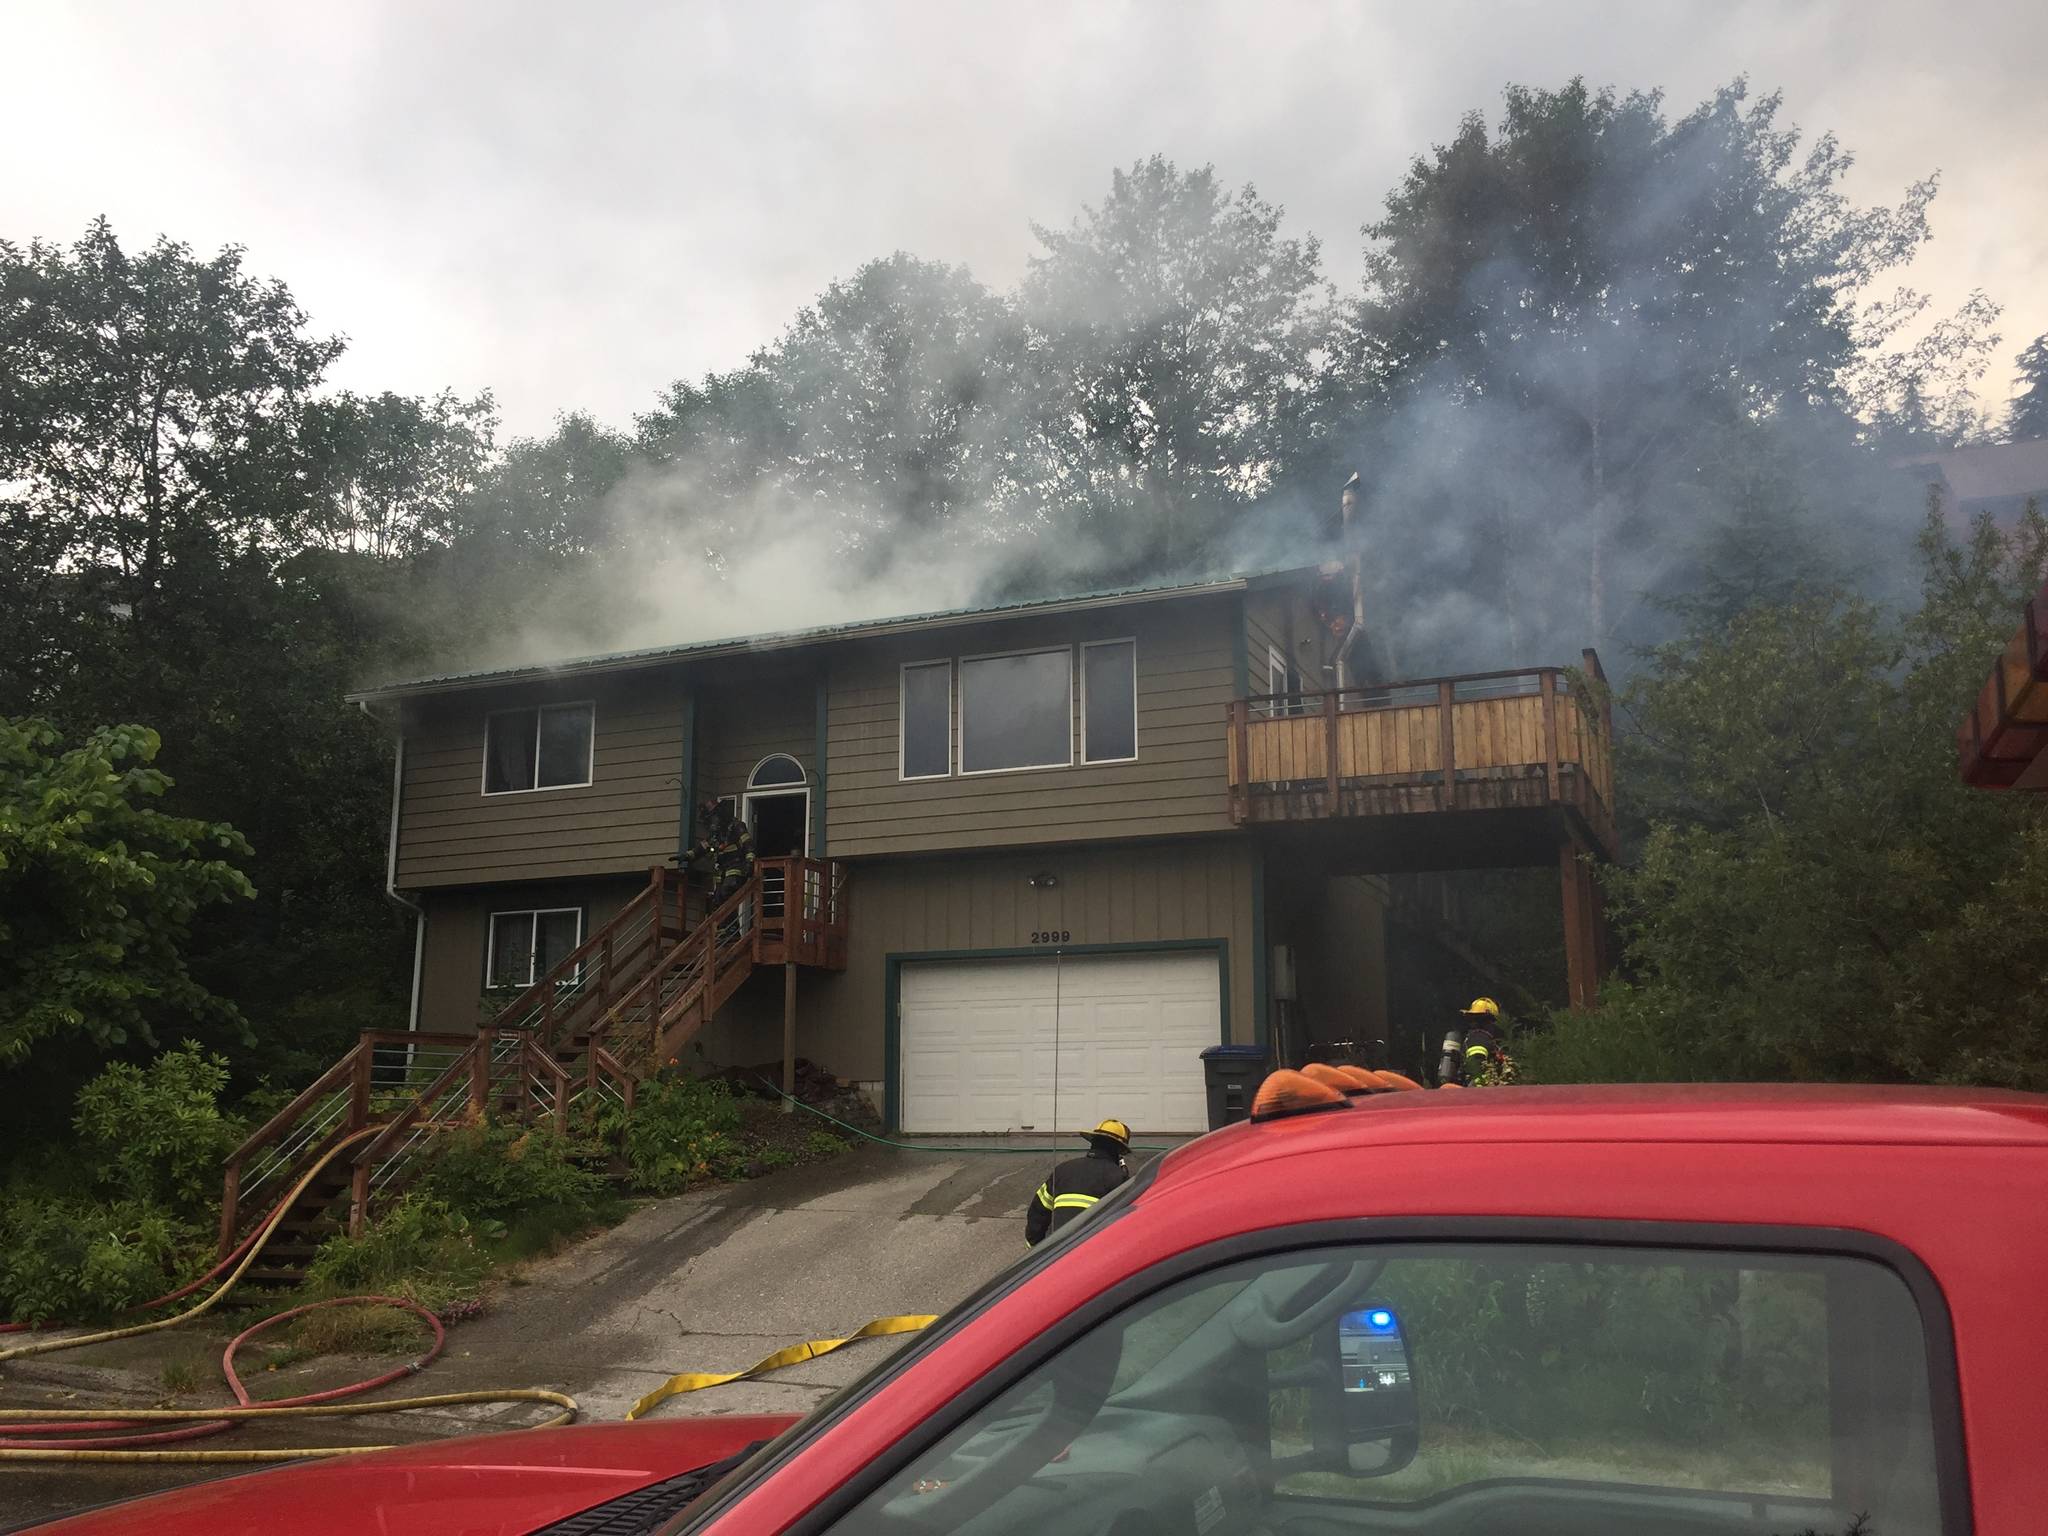 Firefighters are responding to a fire at this house on Douglas Island, Thursday, July 11, 2019. (Nolin Ainsworth | Juneau Empire)